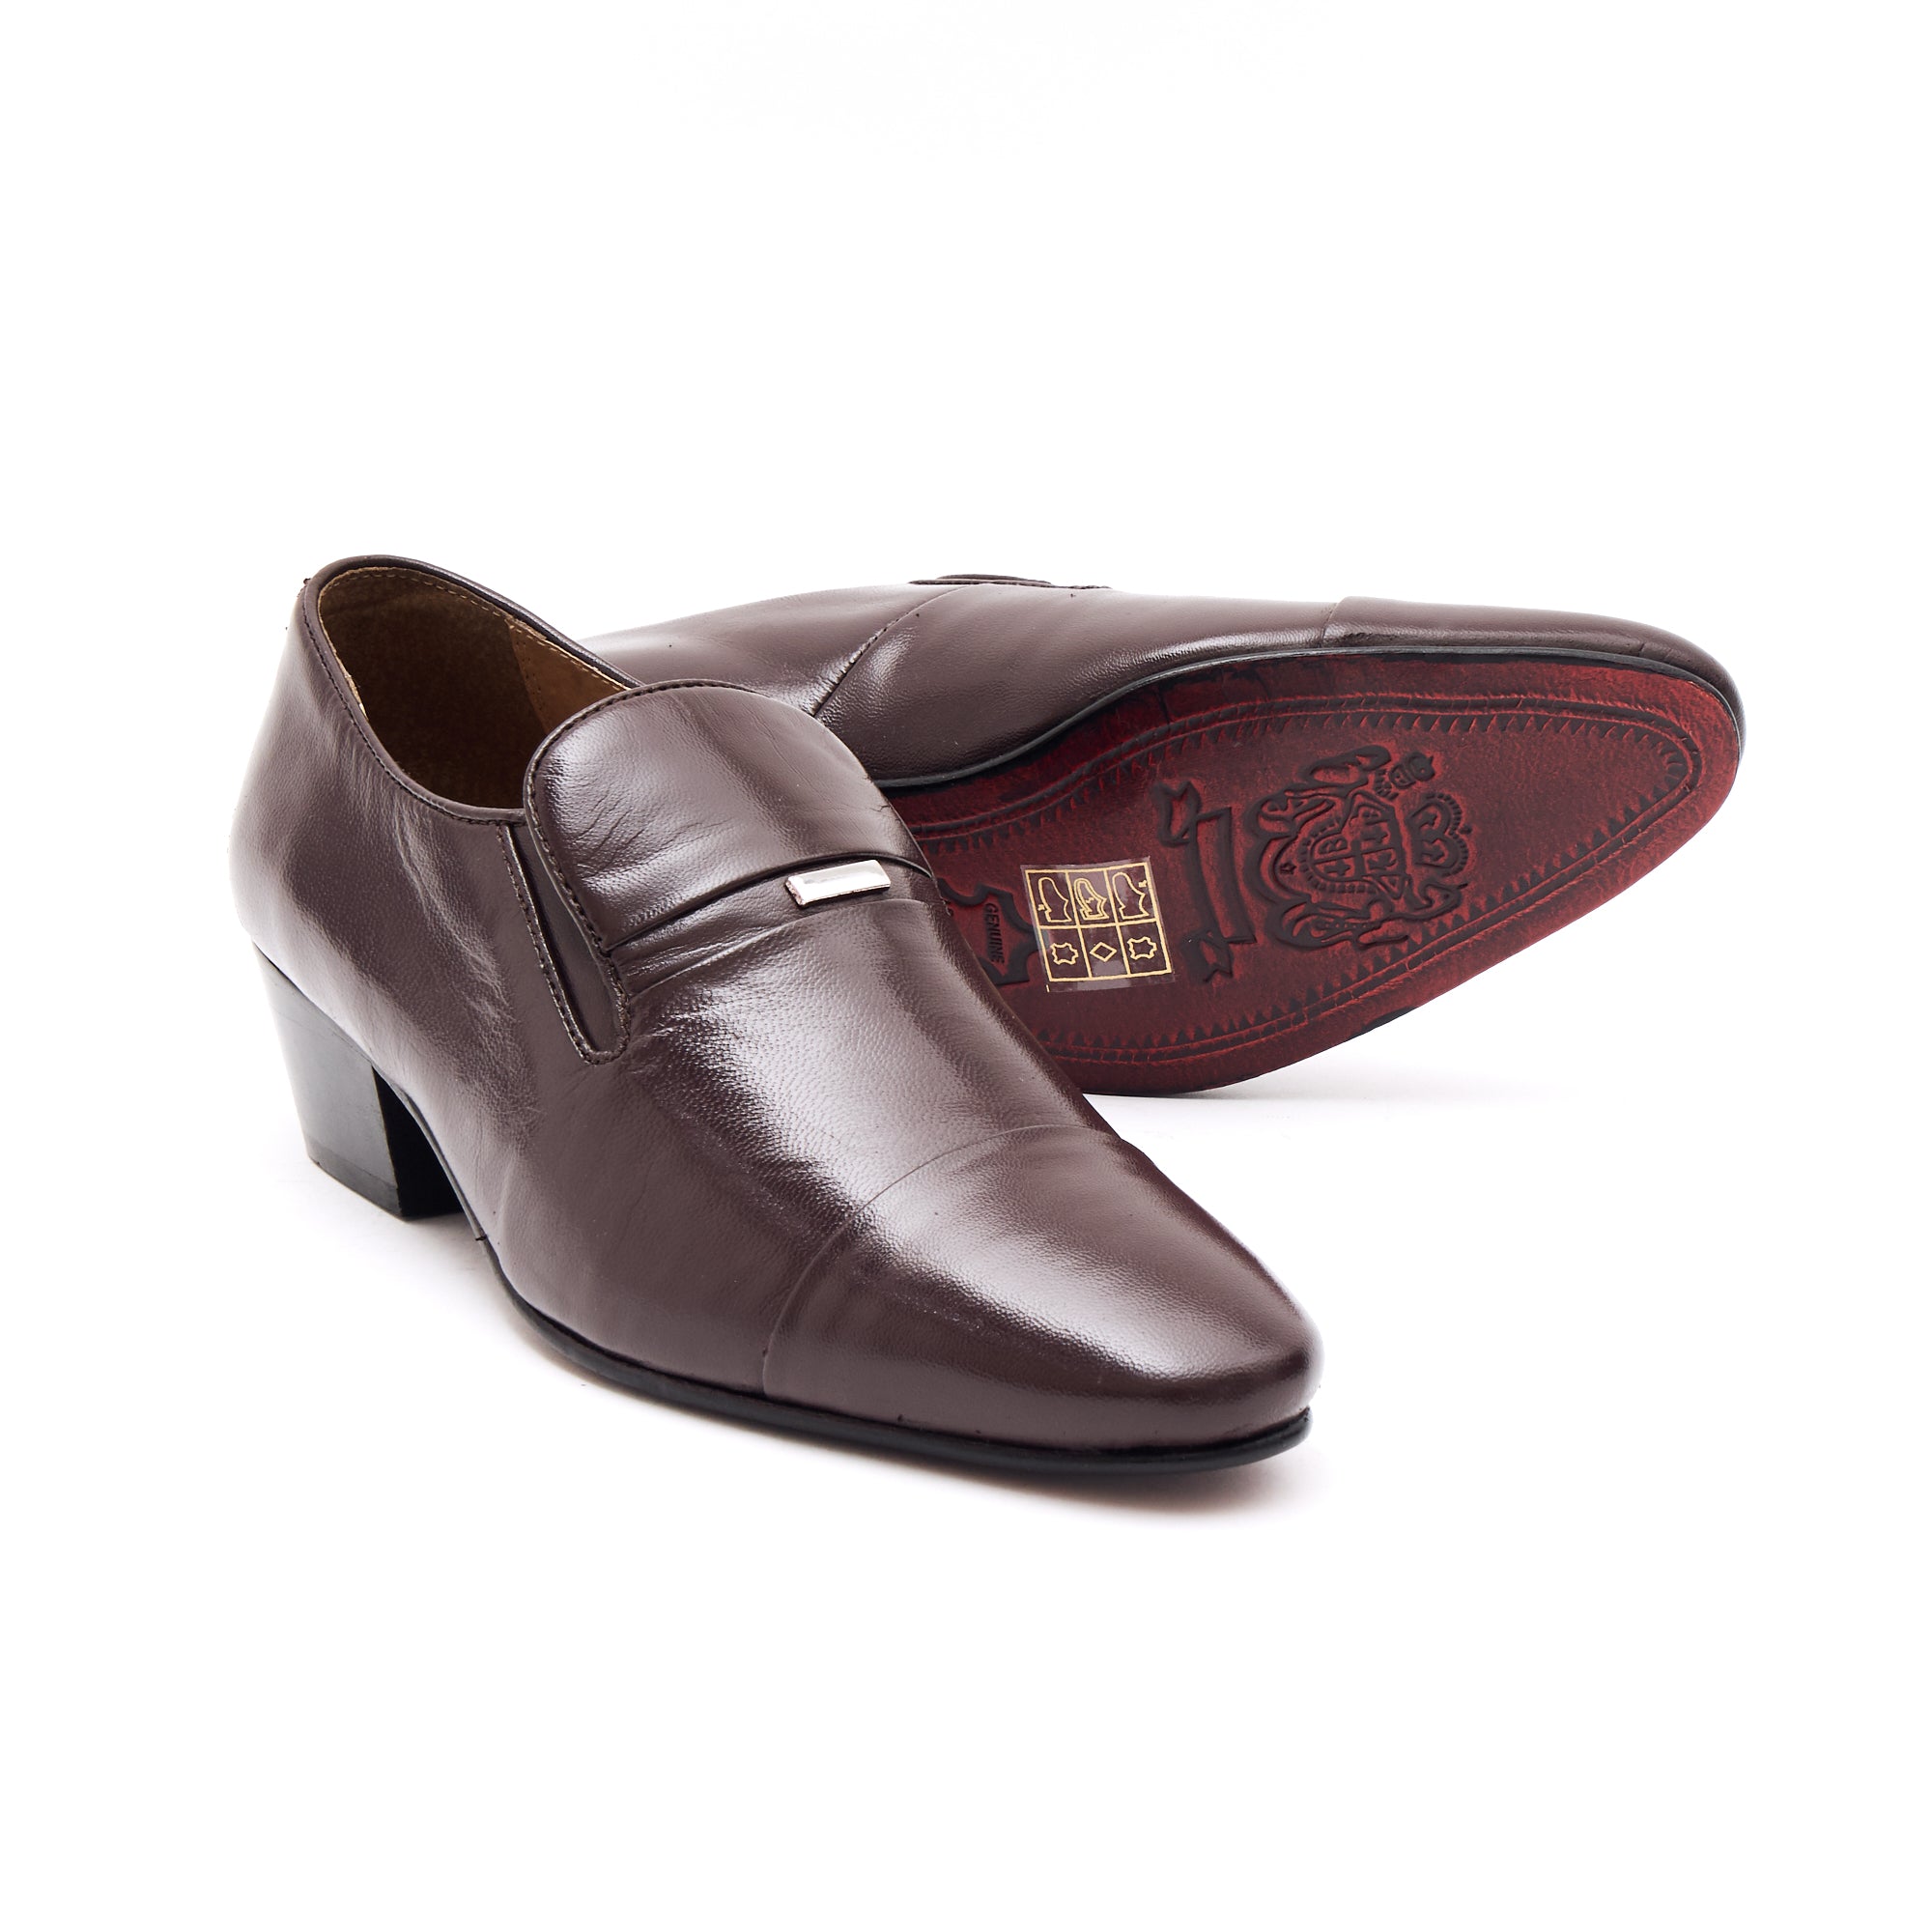 Mens Cuban Heel Leather Shoes - 33478 Brown